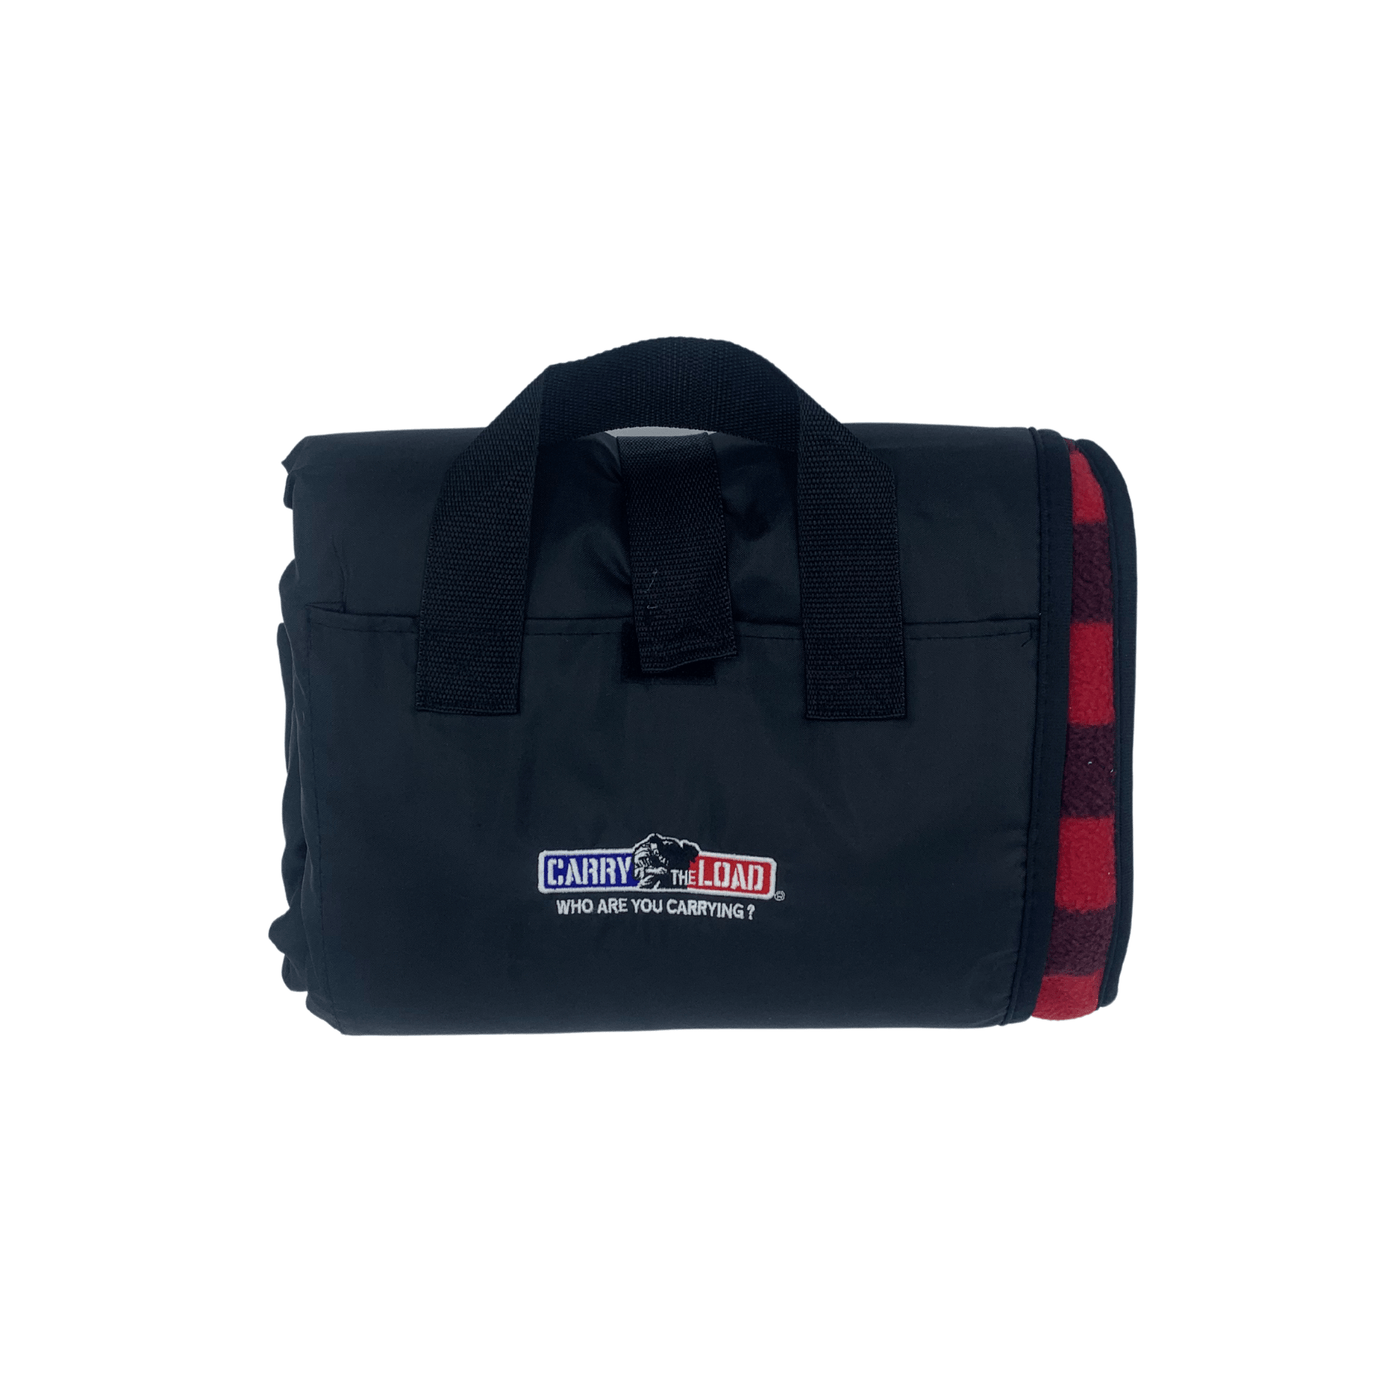 Picnic Blanket -Red/Black - Carry The Load Shop